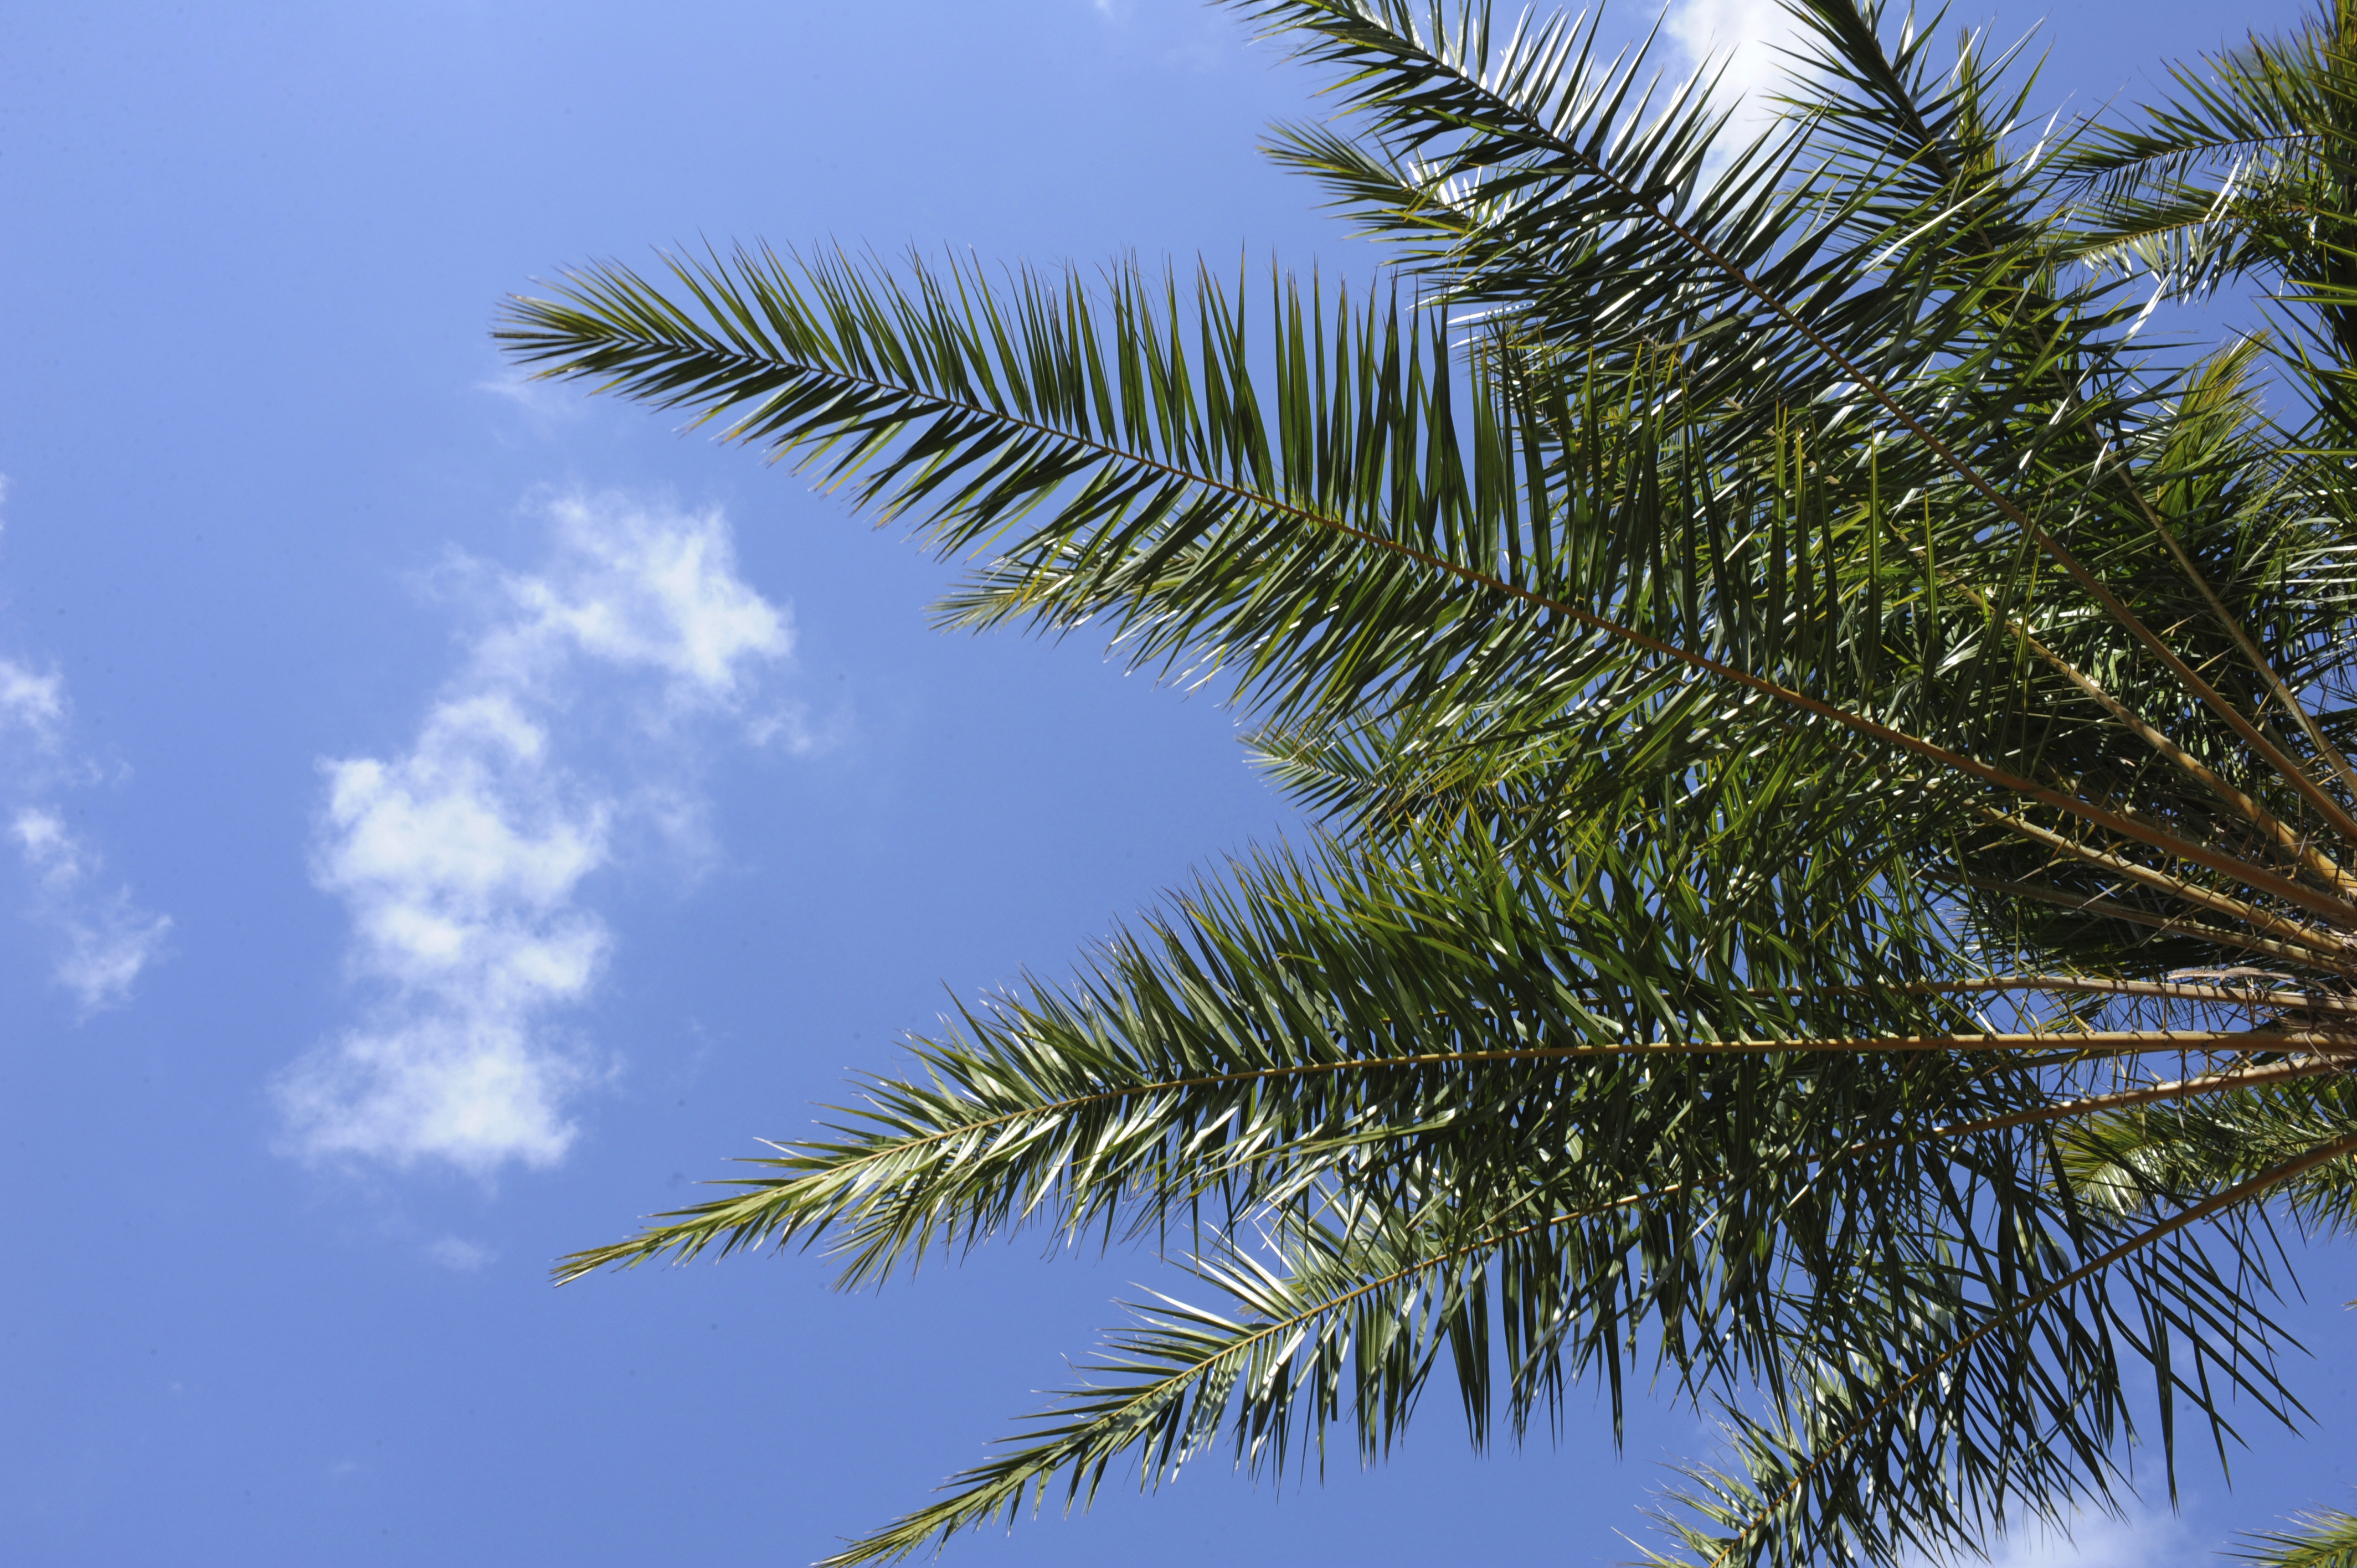 Looking up at a palm tree and blue sky